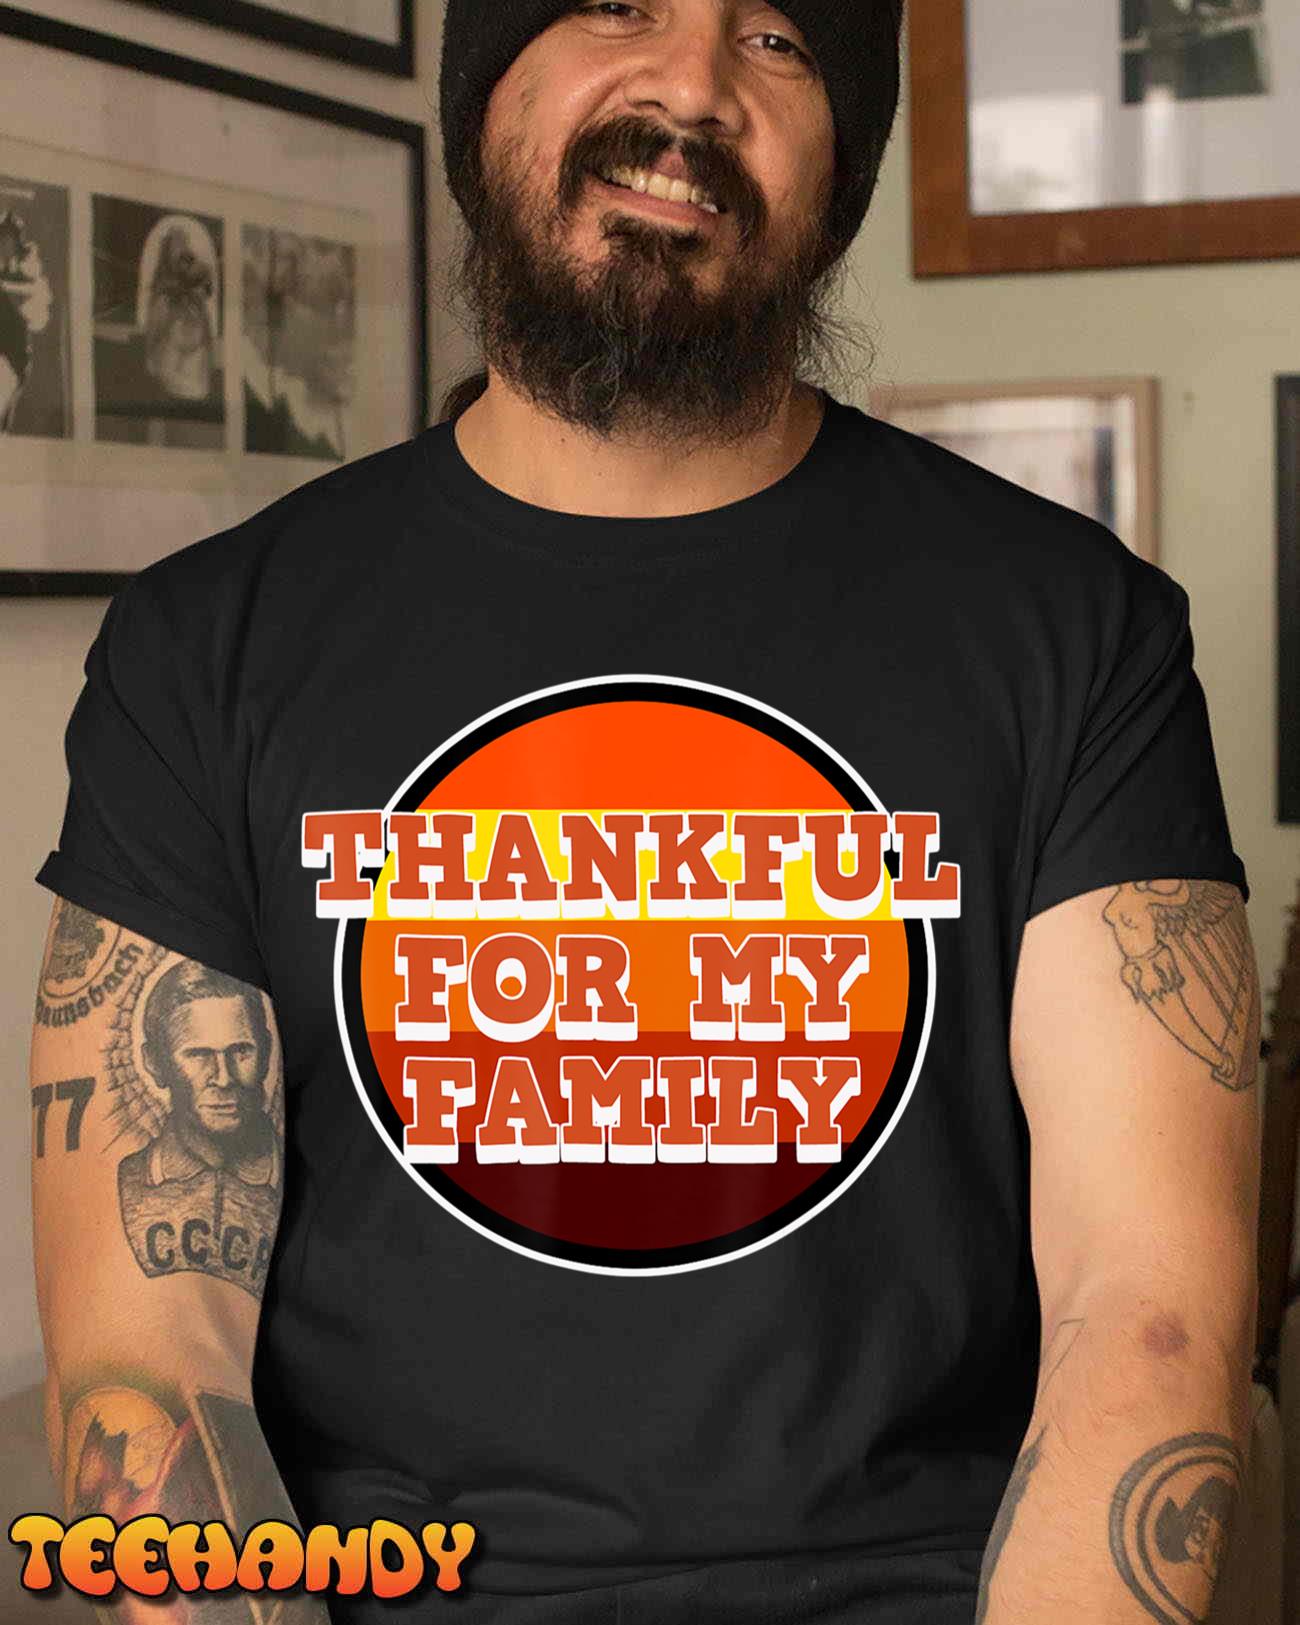 Thankful for the Family – Thanksgiving T-Shirt